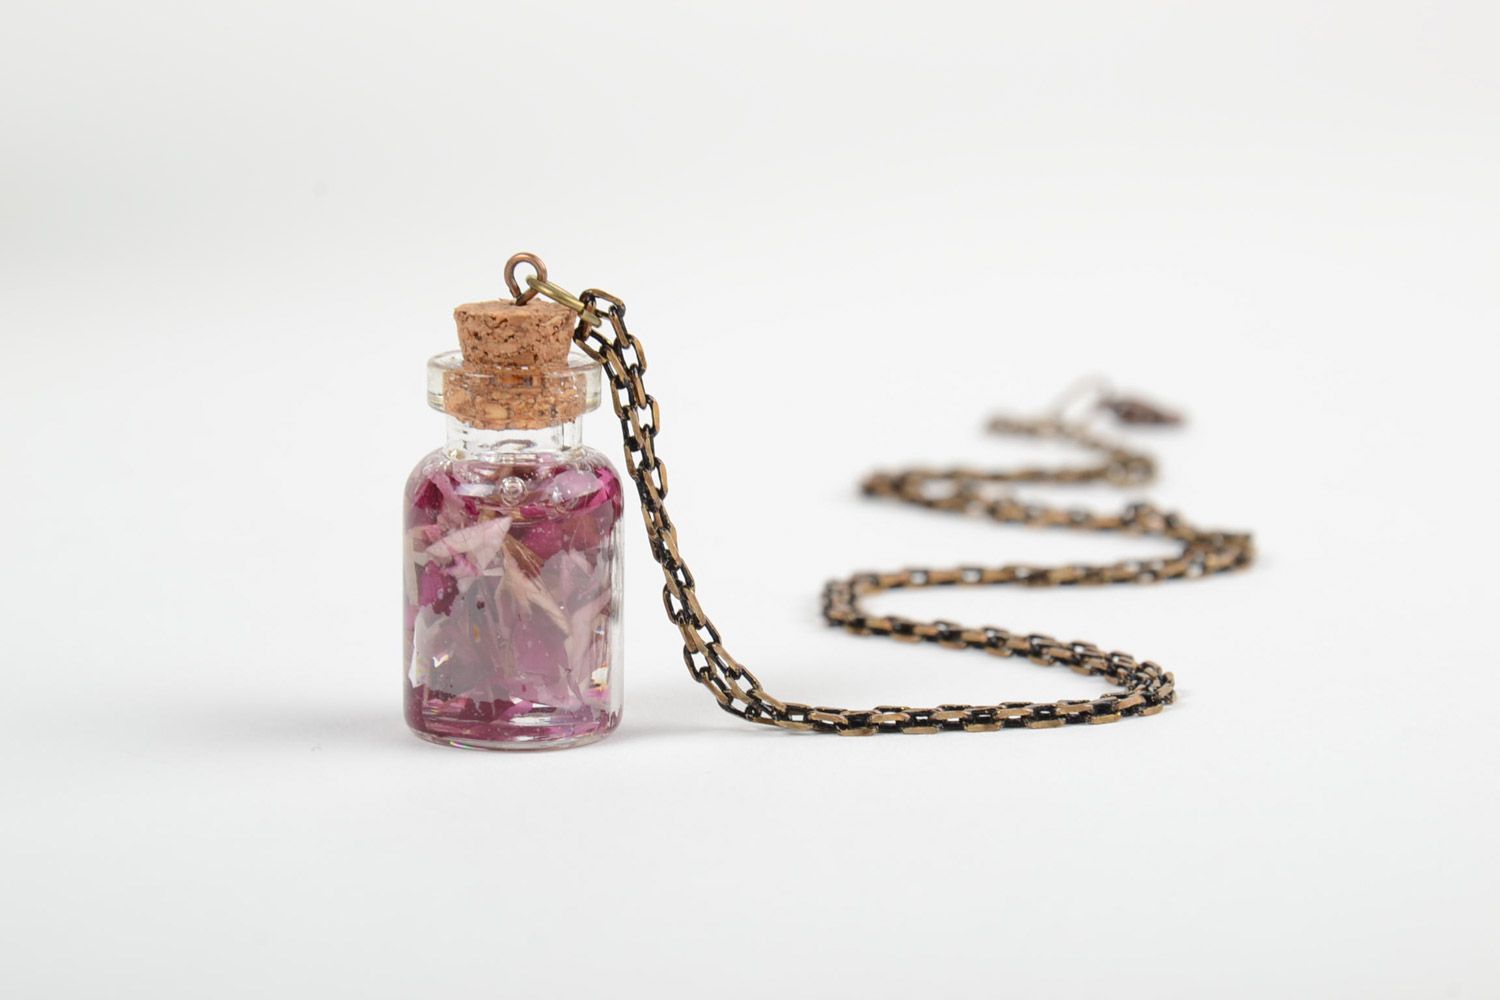 Handmade epoxy resin neck pendant with real flowers inside in the shape of transparent vial photo 4